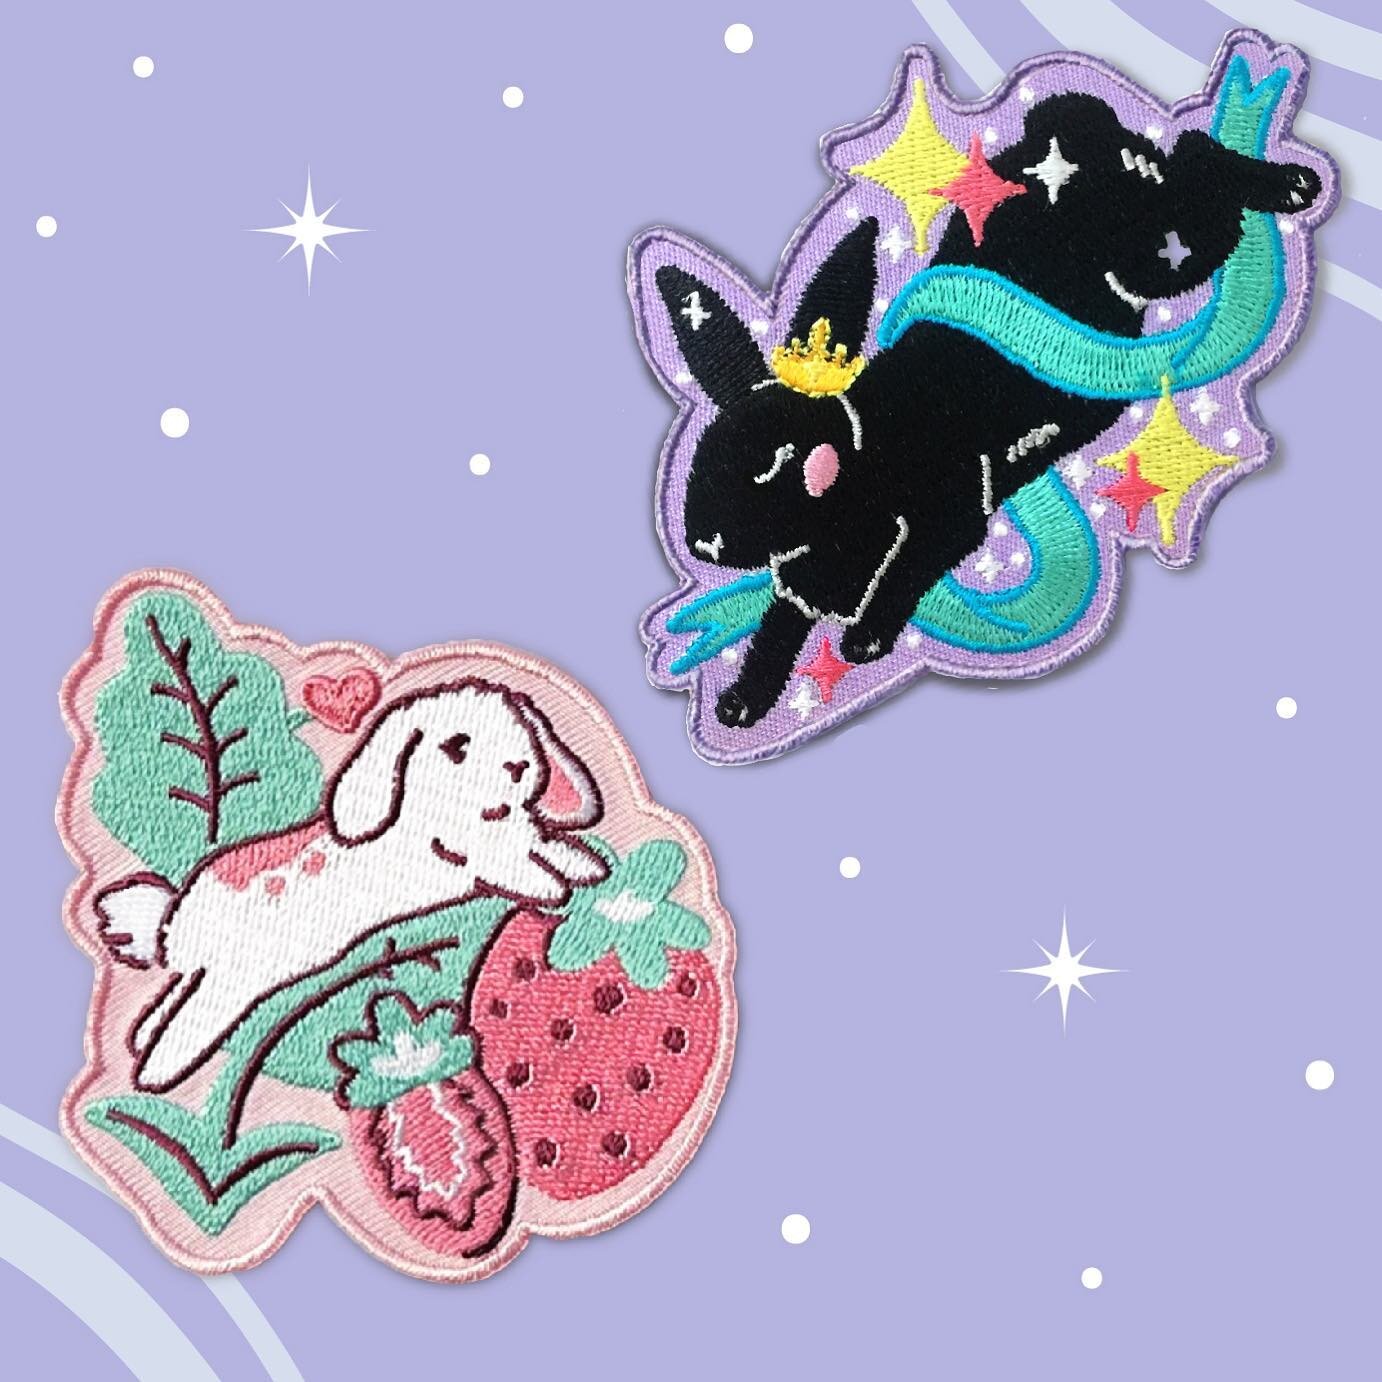 Iron-on embroidered patches that are currently a part of my Magical Rabbits Kickstarter campaign! We have about 2 weeks left of the campaign. I can&rsquo;t wait to get all of these made! A sample of the mug design is also on its way to me 😍 #embroid